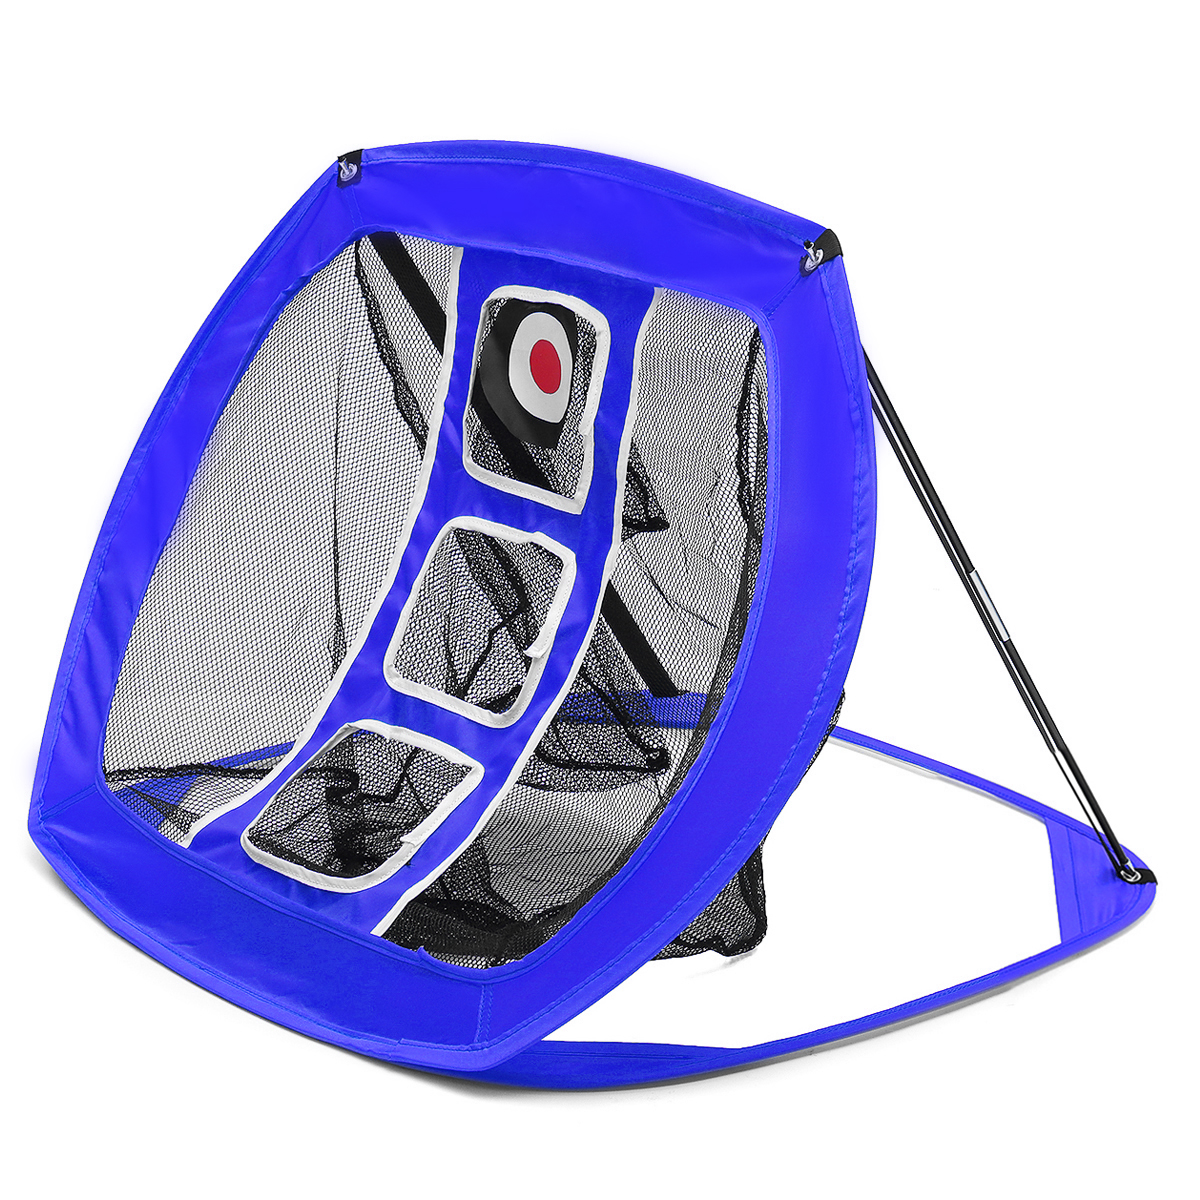 Foldable-Golf-Chipping-Net-Backyard-Driving-Aid-Indoor-Outdoor-Hitting-Practice-Garden-Living-Room-B-1688178-3